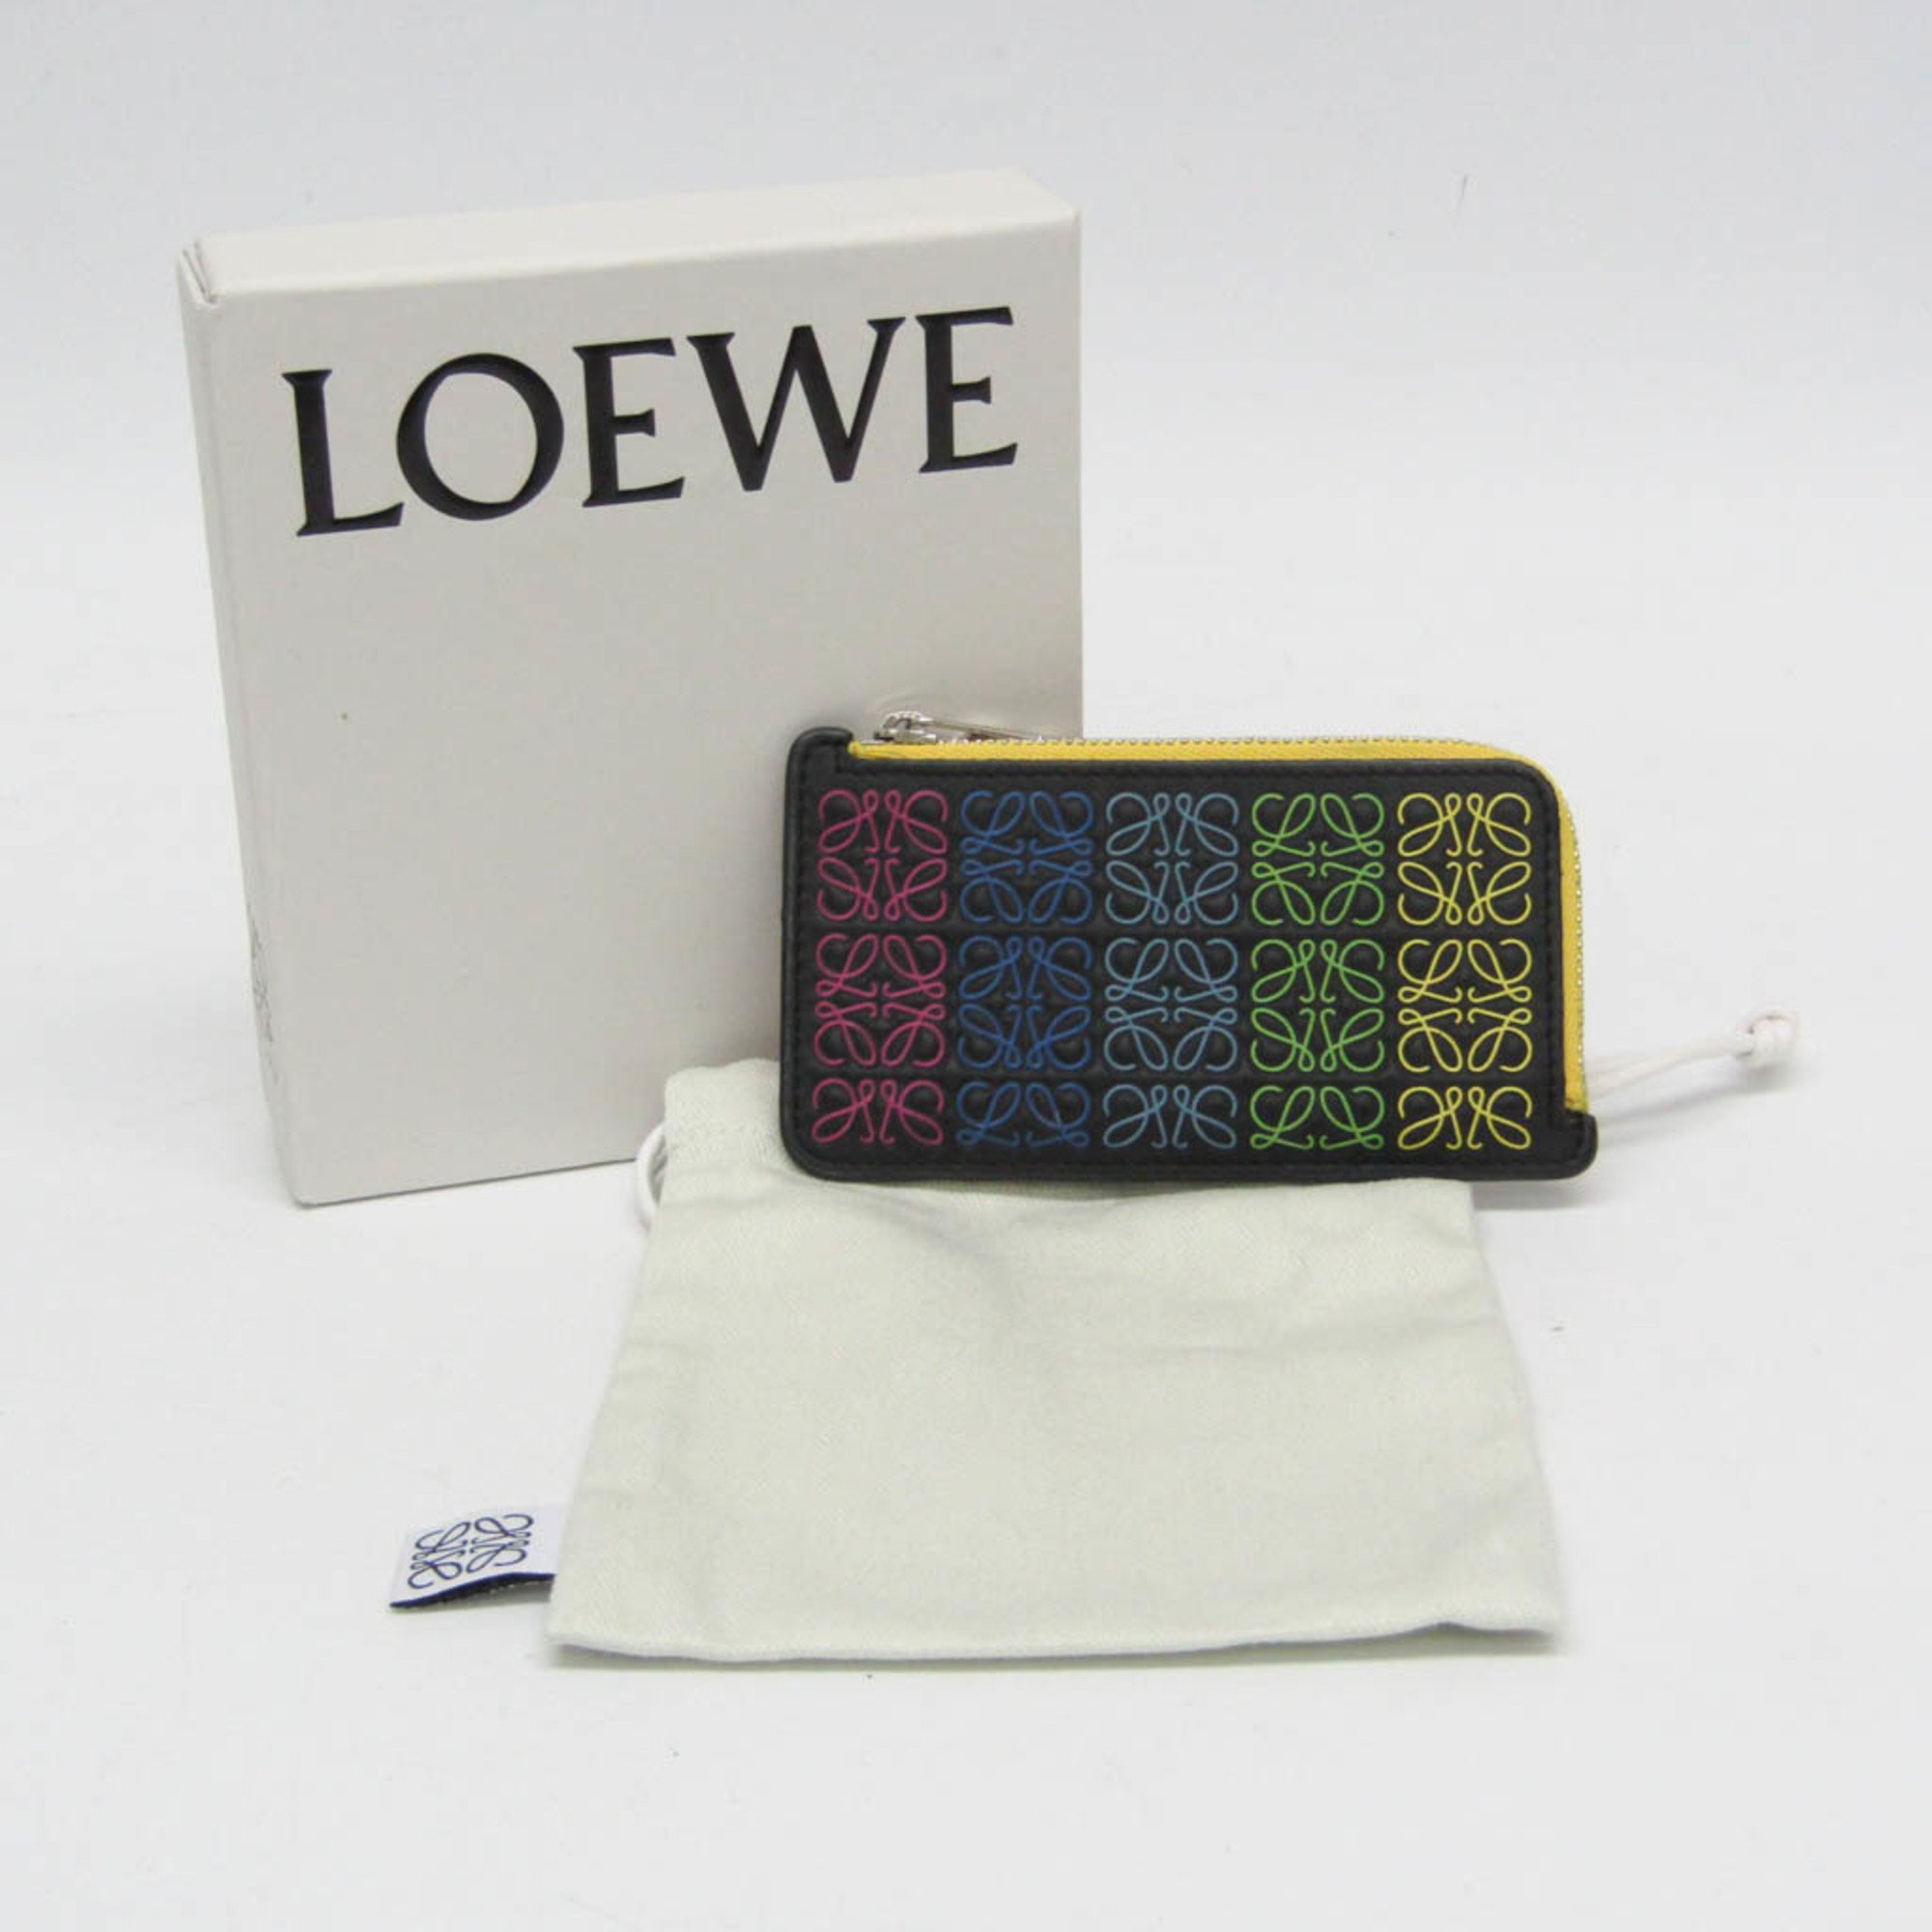 Loewe Anagram Card Case 109.11.K07 Women's Leather Coin Purse/coin Case Black,Multi-color